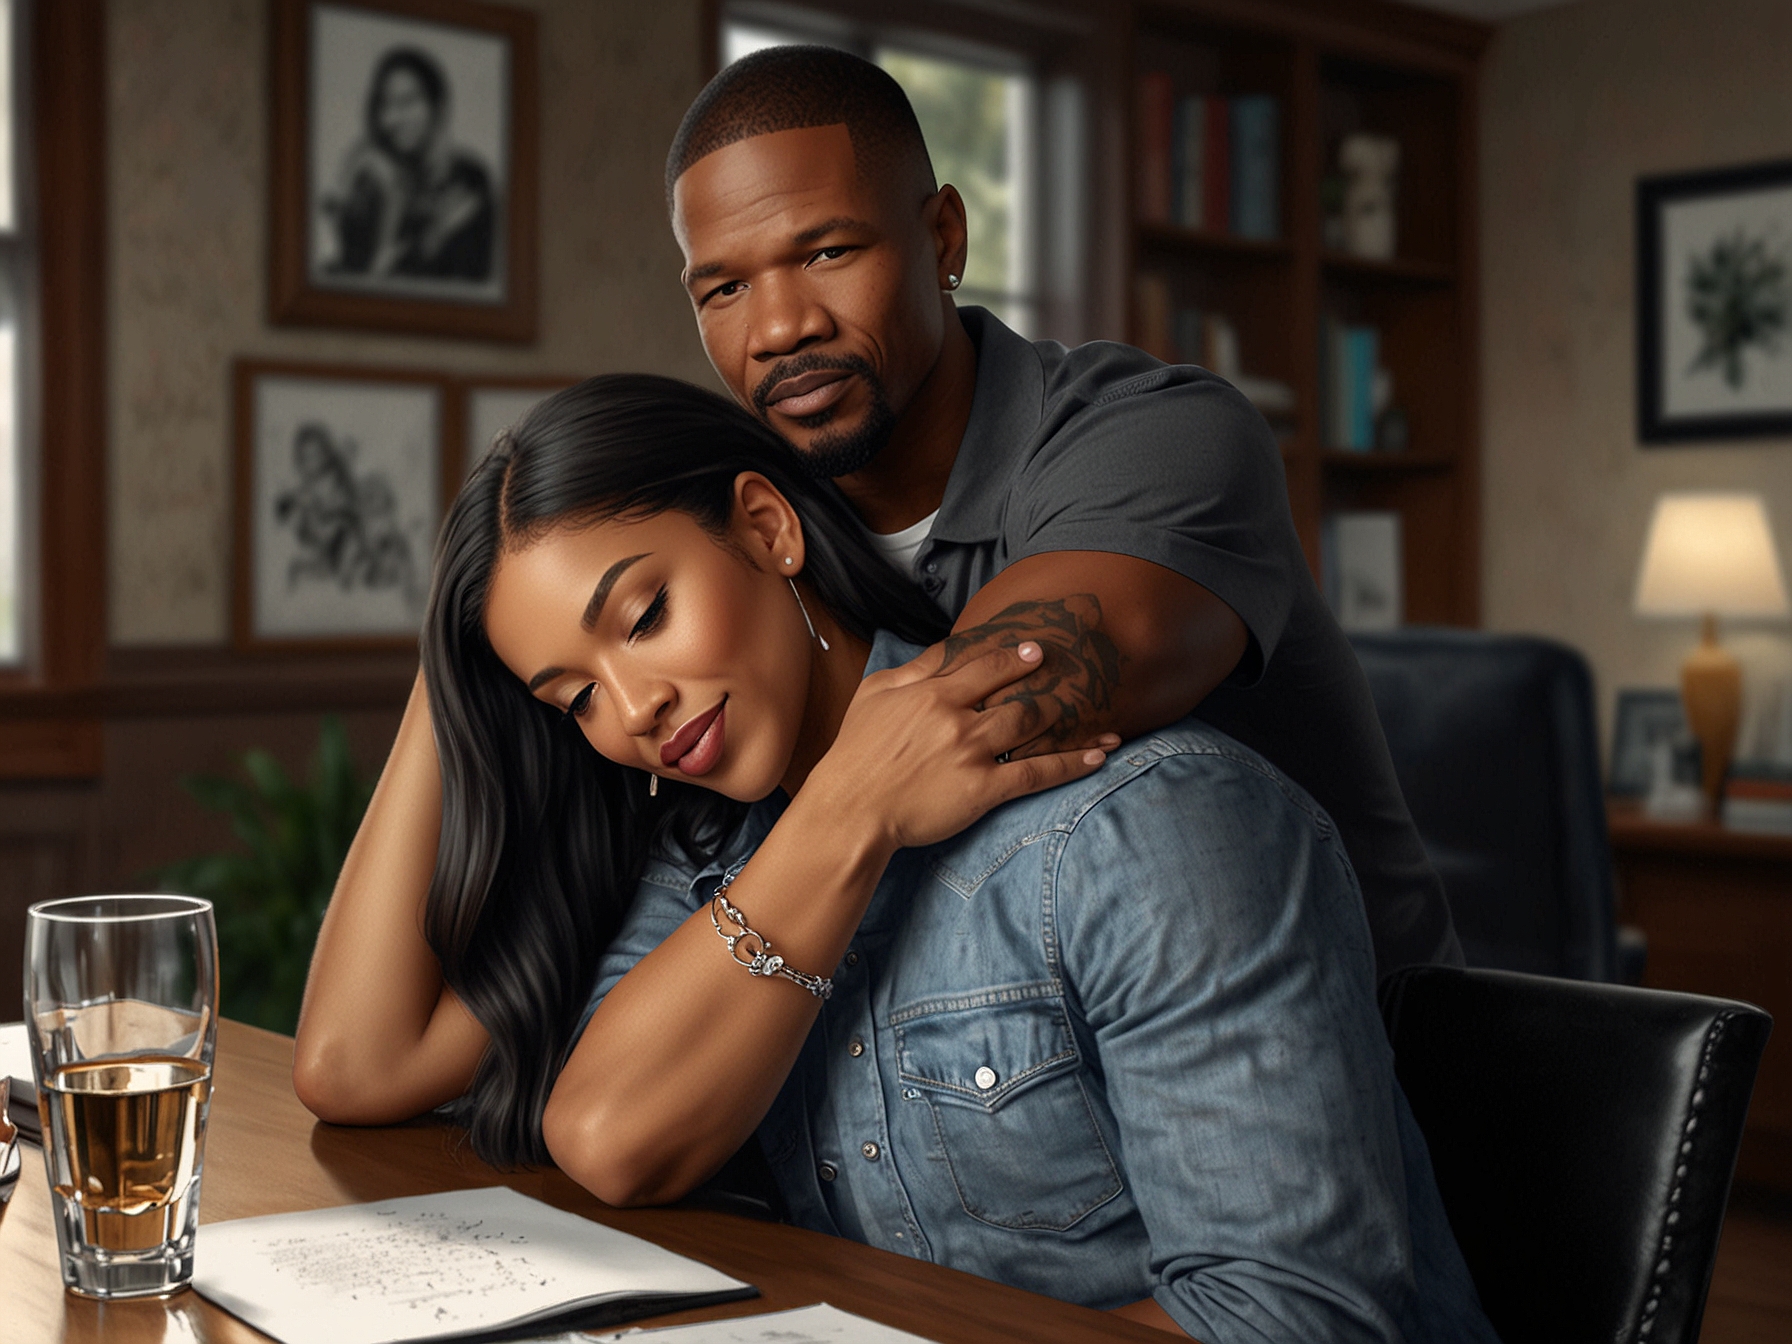 Corinne Foxx shares an emotional moment with Jamie Foxx, as they celebrate a milestone in his recovery journey, surrounded by family and friends, showcasing his resilience and determination.